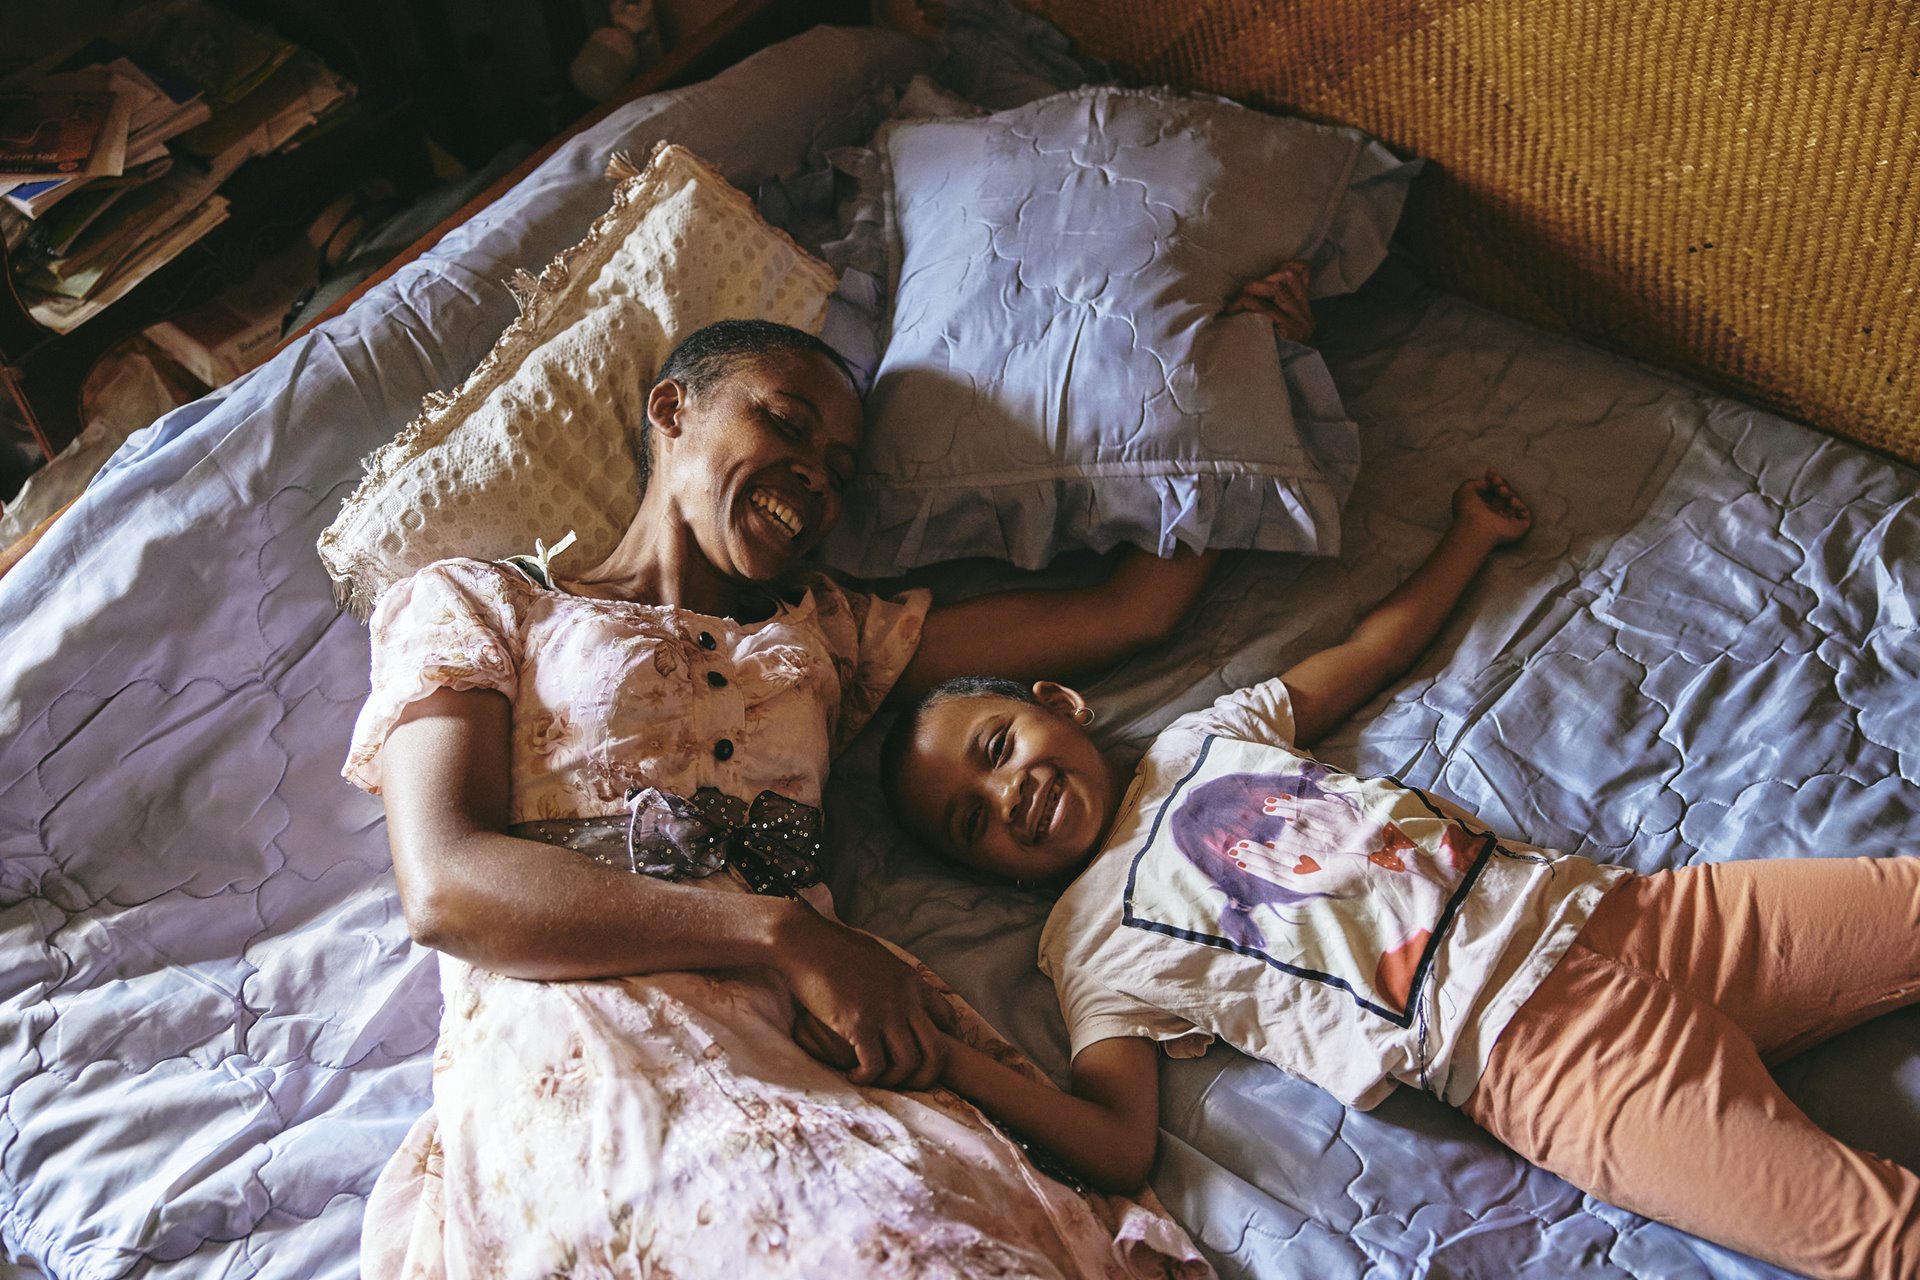 Fara and her daughter Odliatemix lie together on the bed they share with Dada Paul, Fara&rsquo;s father, in Antananarivo, Madagascar. Fara is the sole provider for the family of three and struggles to balance her time between work, caring for her father, and spending time with her daughter.&nbsp;